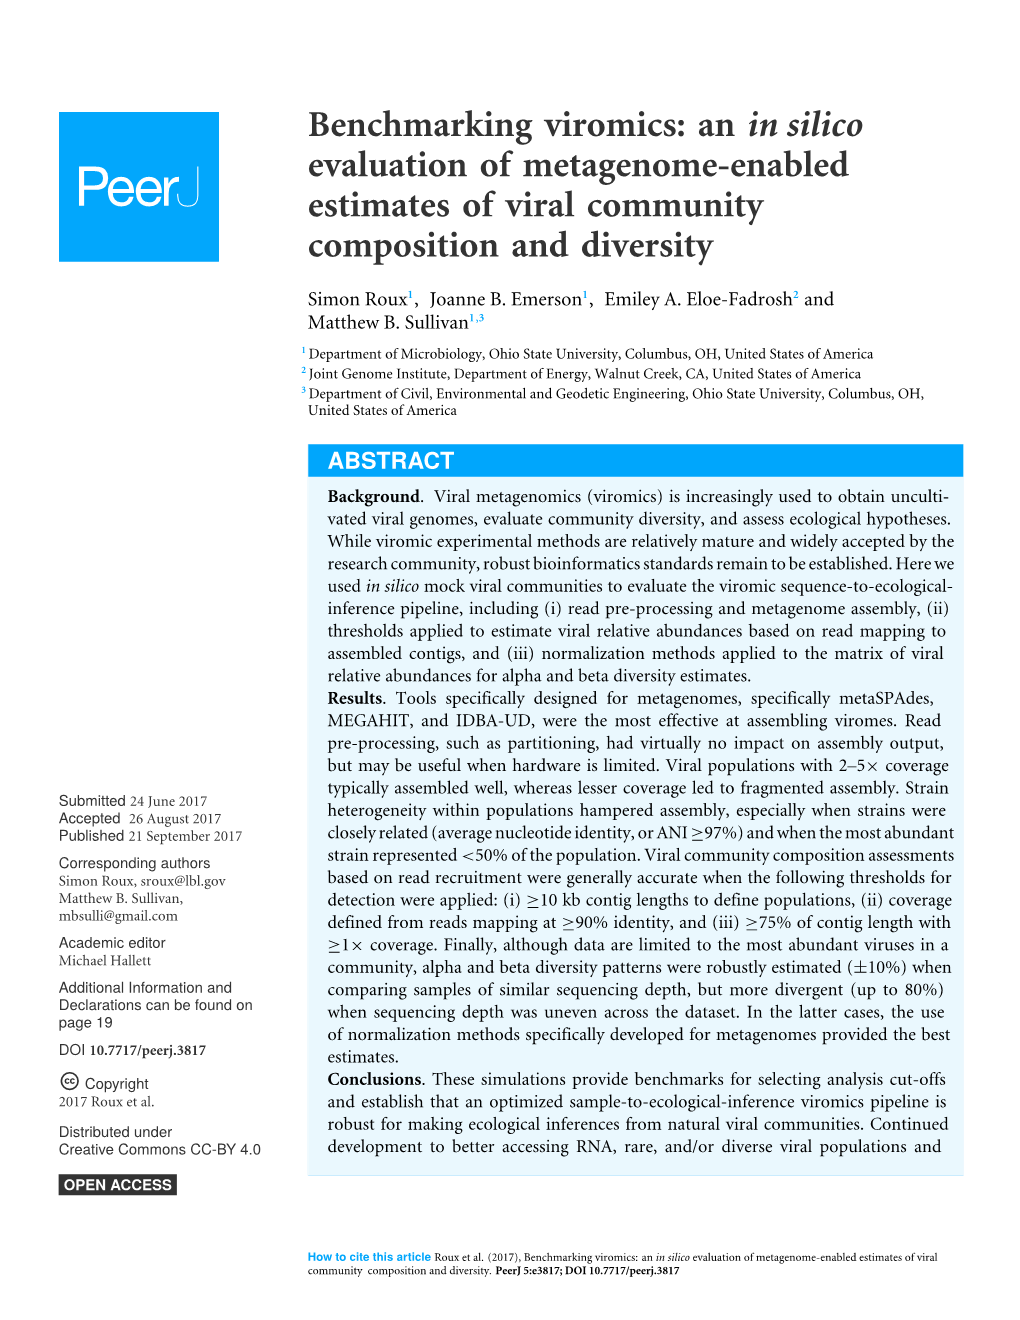 An in Silico Evaluation of Metagenome-Enabled Estimates of Viral Community Composition and Diversity